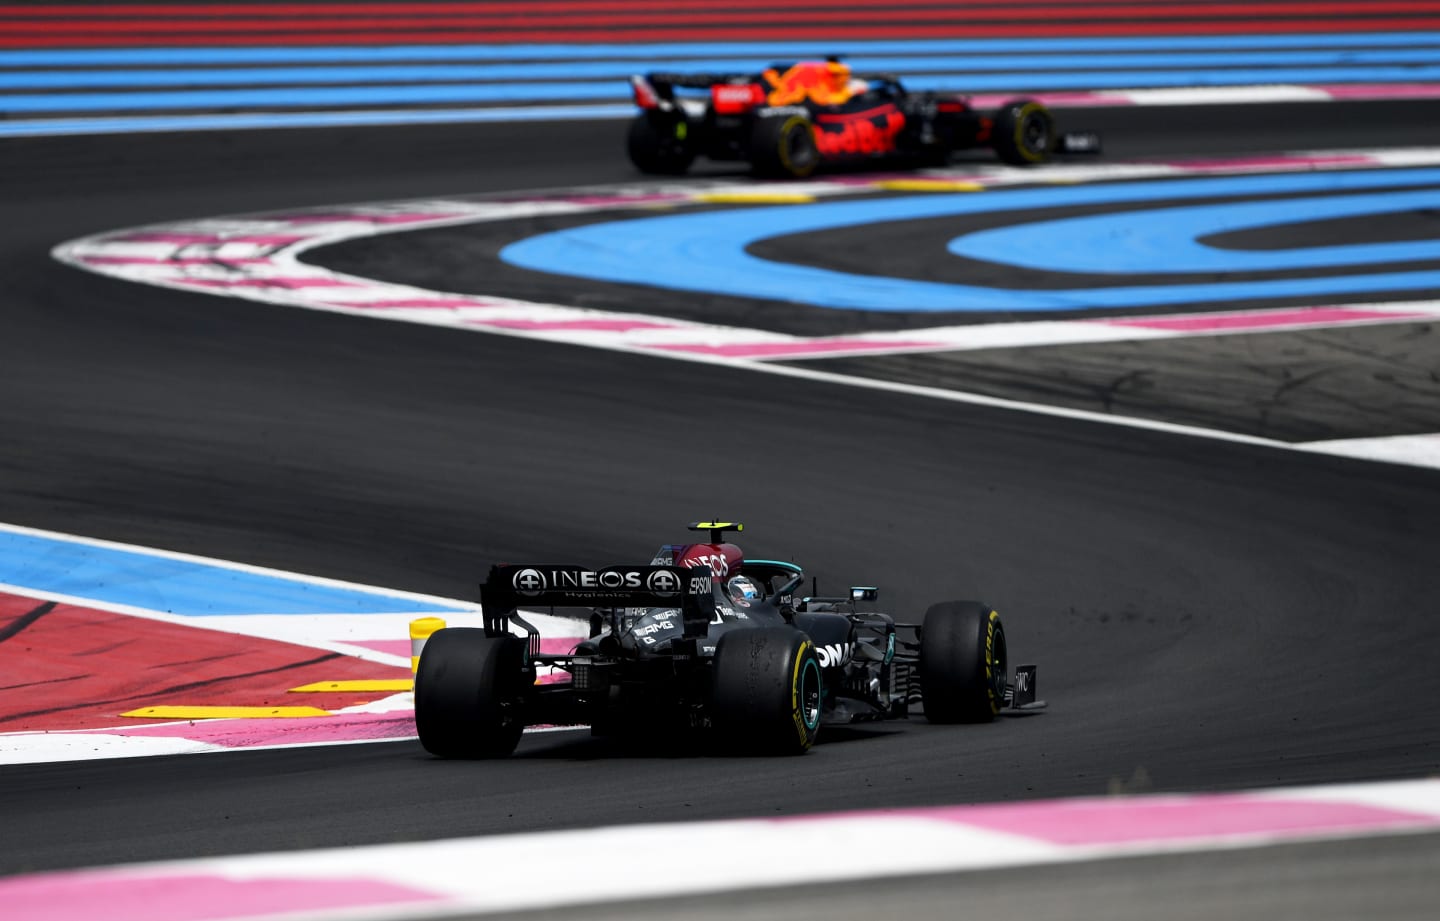 LE CASTELLET, FRANCE - JUNE 20: Valtteri Bottas of Finland driving the (77) Mercedes AMG Petronas F1 Team Mercedes W12 on track during the F1 Grand Prix of France at Circuit Paul Ricard on June 20, 2021 in Le Castellet, France. (Photo by Rudy Carezzevoli/Getty Images)